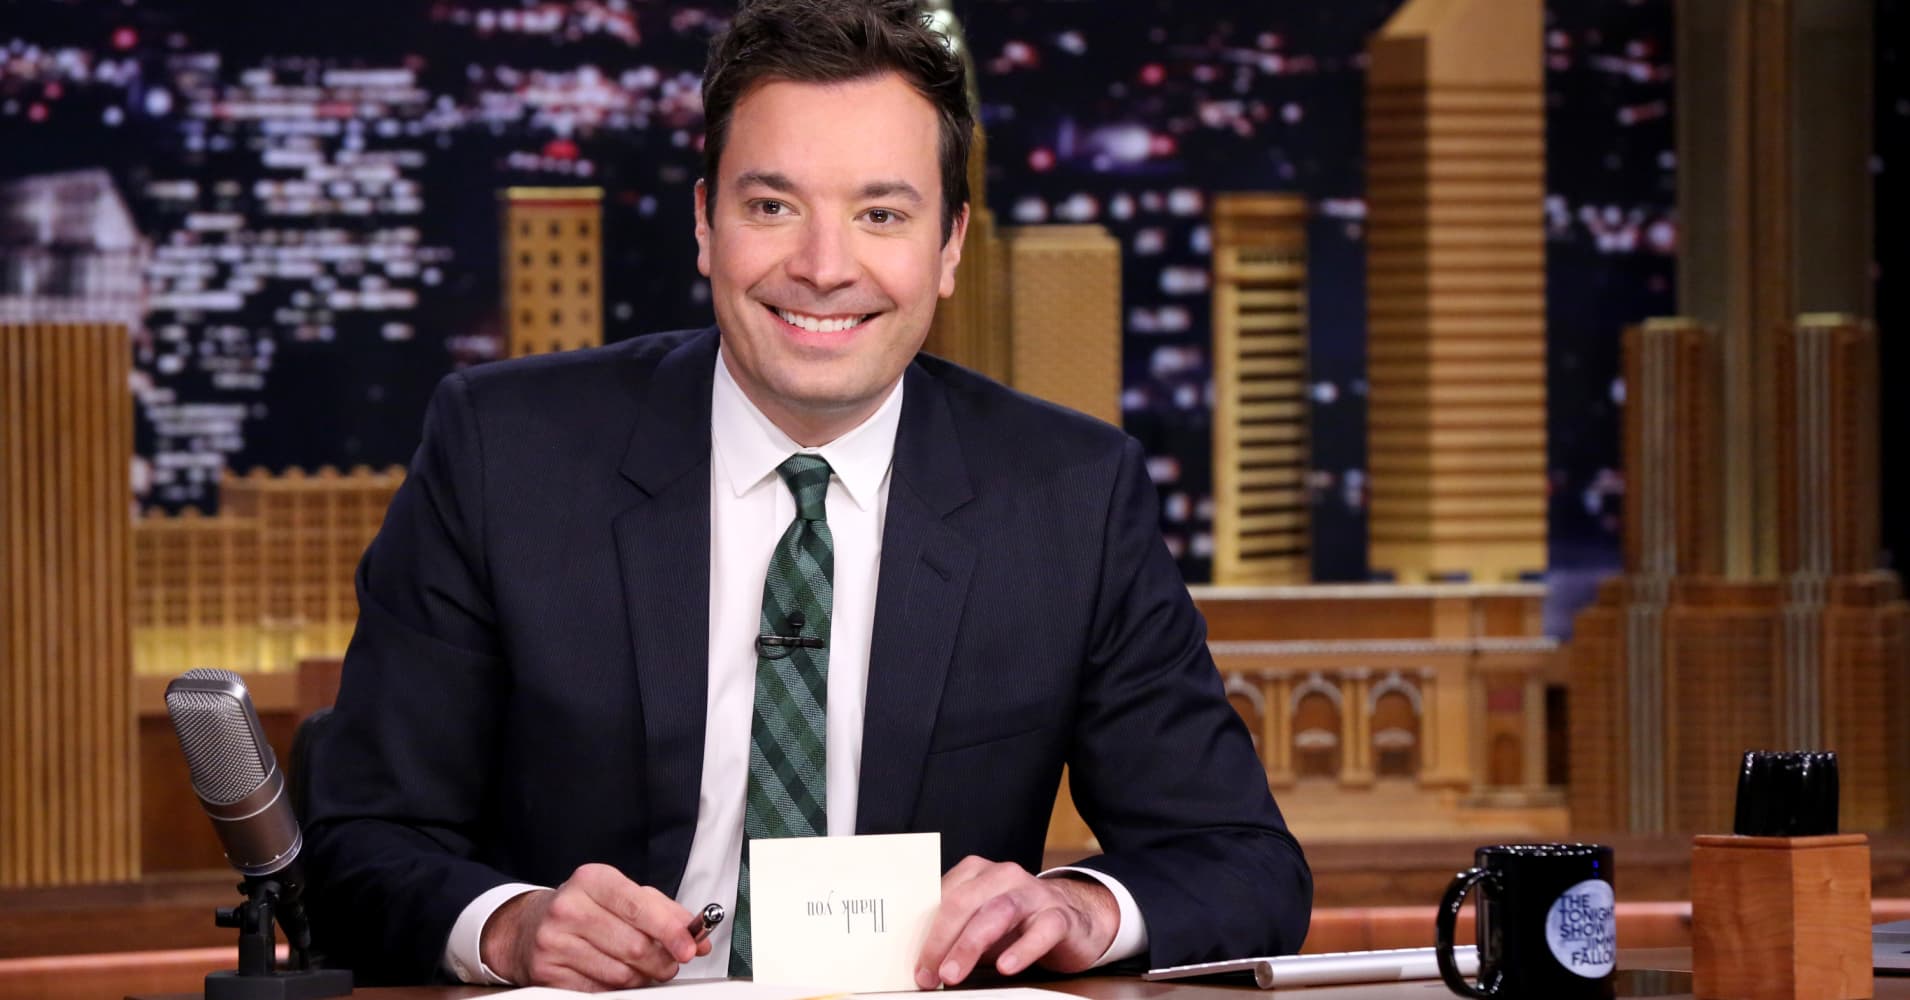 THE TONIGHT SHOW STARRING JIMMY FALLON -- Episode 0367 -- Pictured: Host Jimmy Fallon during Thank You Notes on November 13, 2015 -- (Photo by: Douglas Gorenstein/NBC/NBCU Photo Bank via Getty Images)